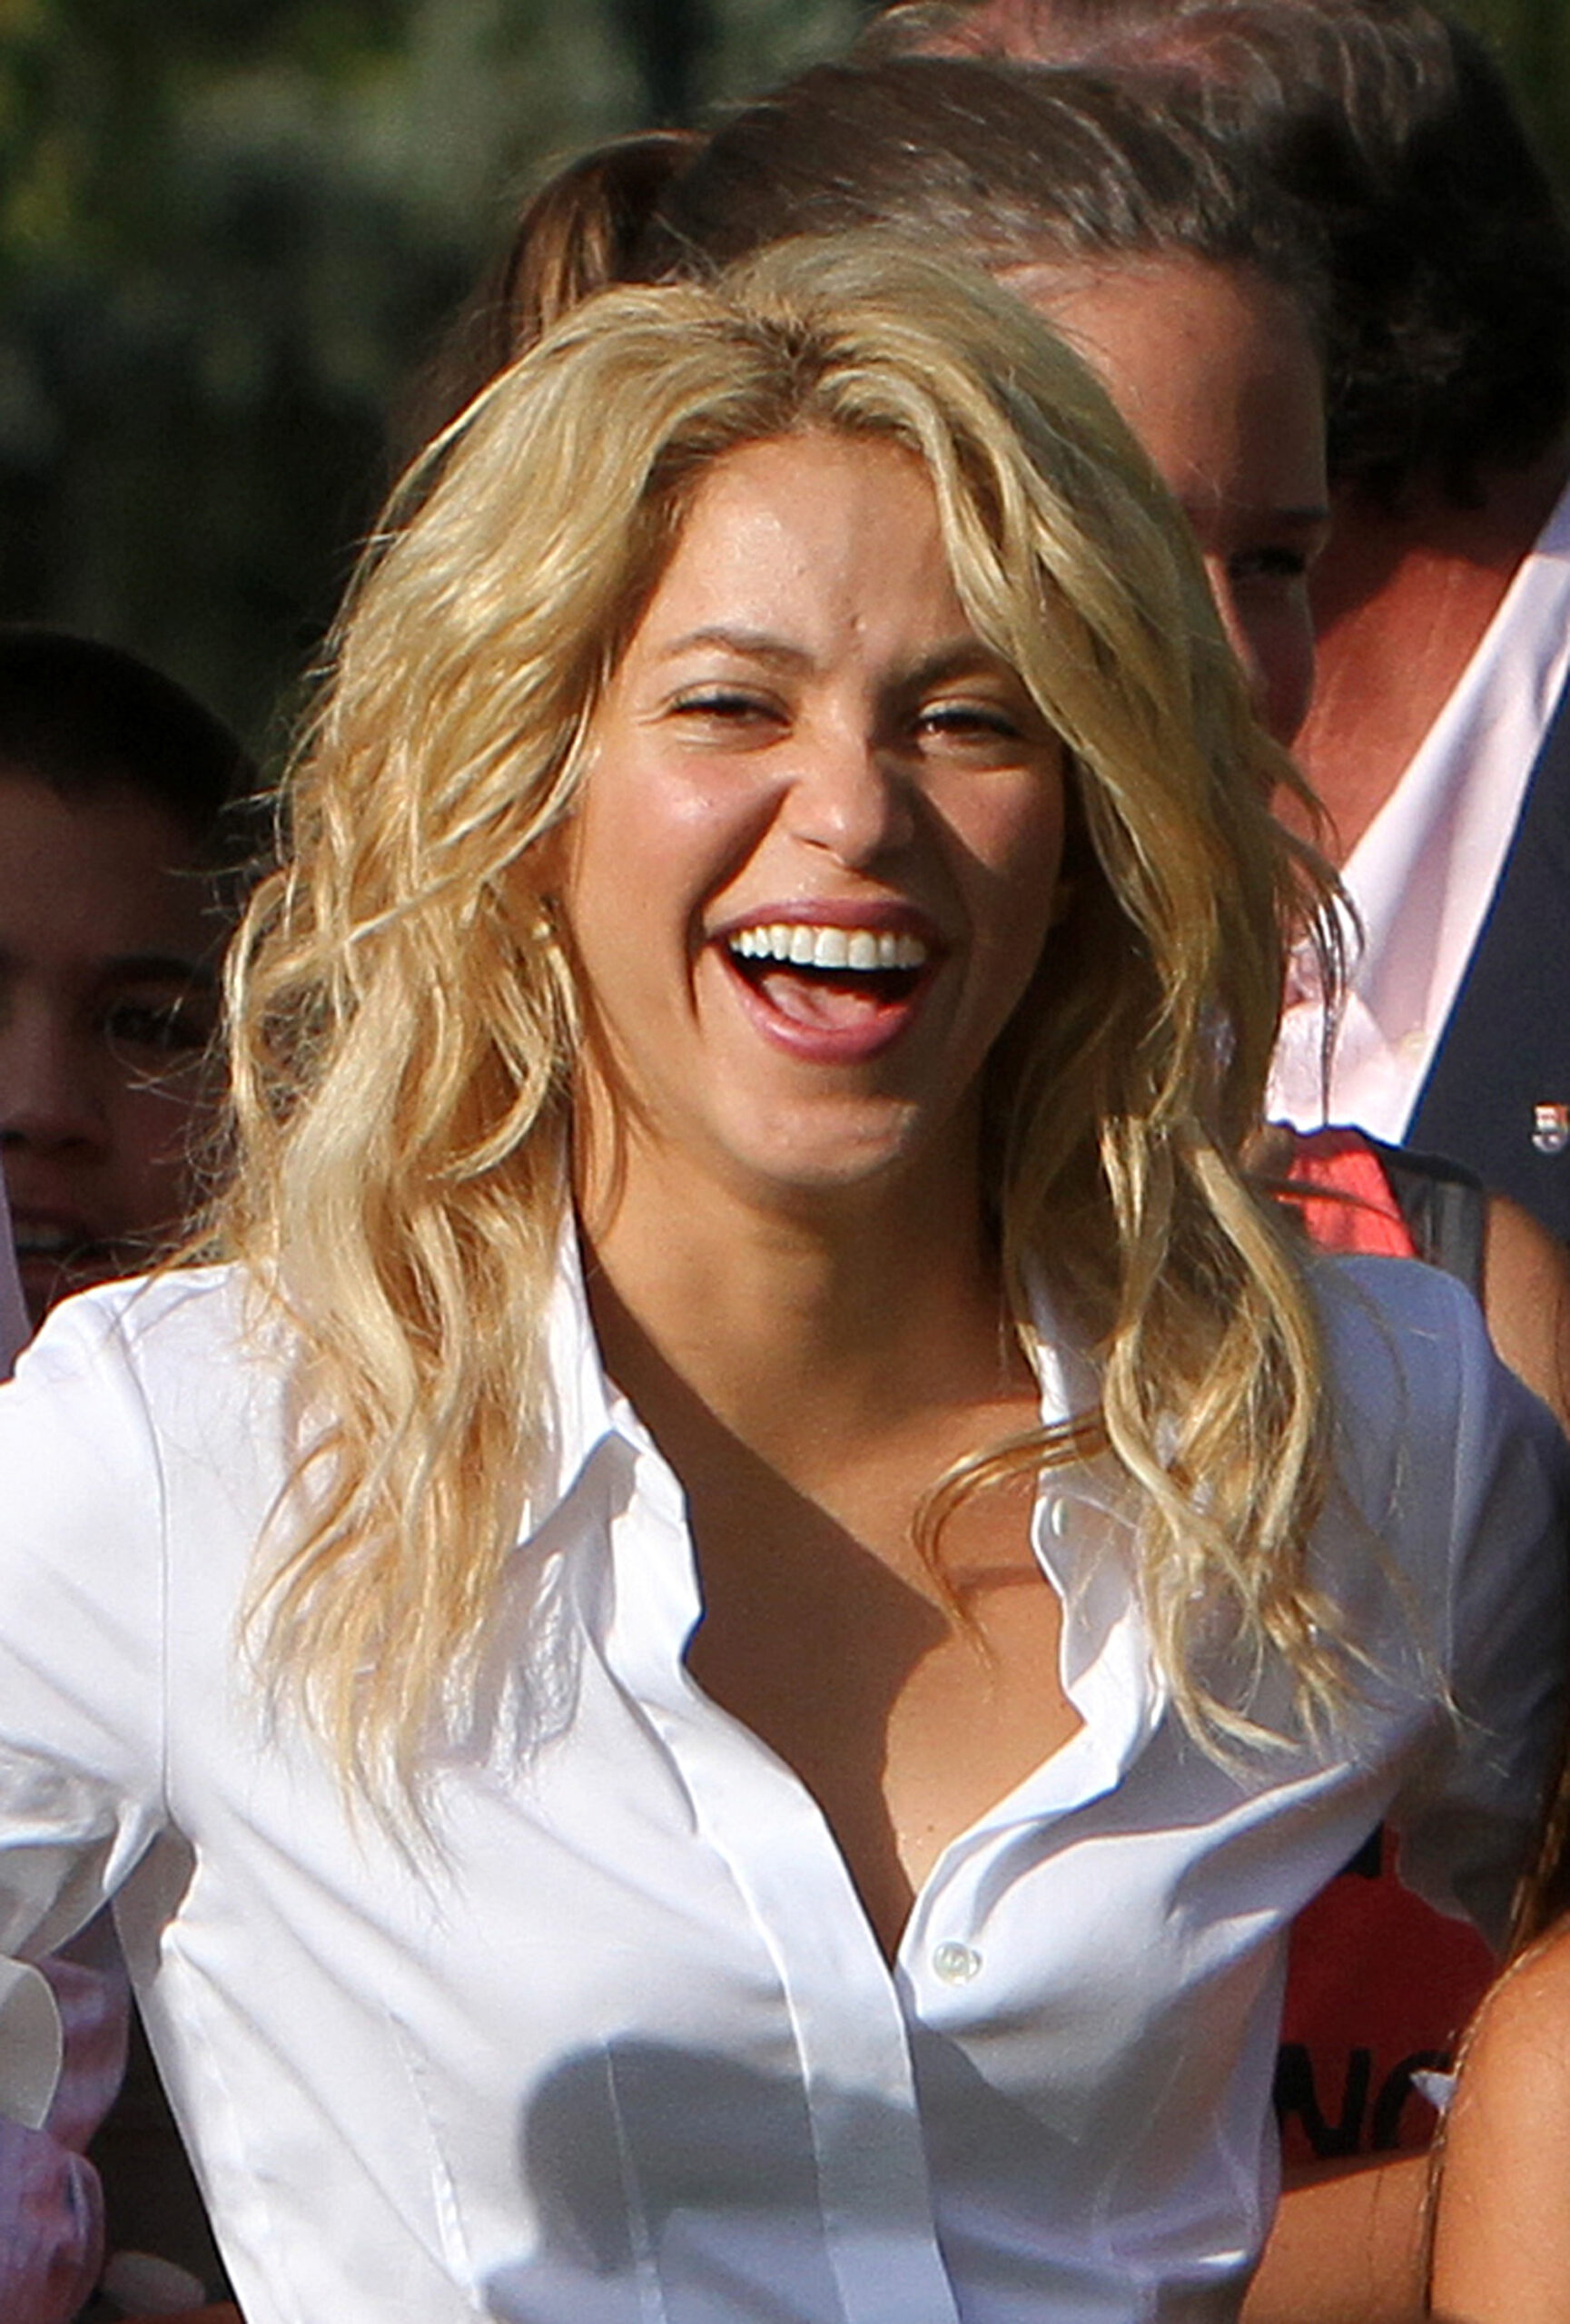 Singer Shakira and her boyfriend footballer Gerard Pique attend a press conference for Pies Descalzos and FC Barcelona to announce a grant to YMCA of Greater Miami at the University of Miami in Coral Gables, Florida. 01 Aug 2001 Pictured: Shakira; Gerard Pique. Photo credit: MEGA TheMegaAgency.com +1 888 505 6342 (Mega Agency TagID: MEGA636324_037.jpg) [Photo via Mega Agency]